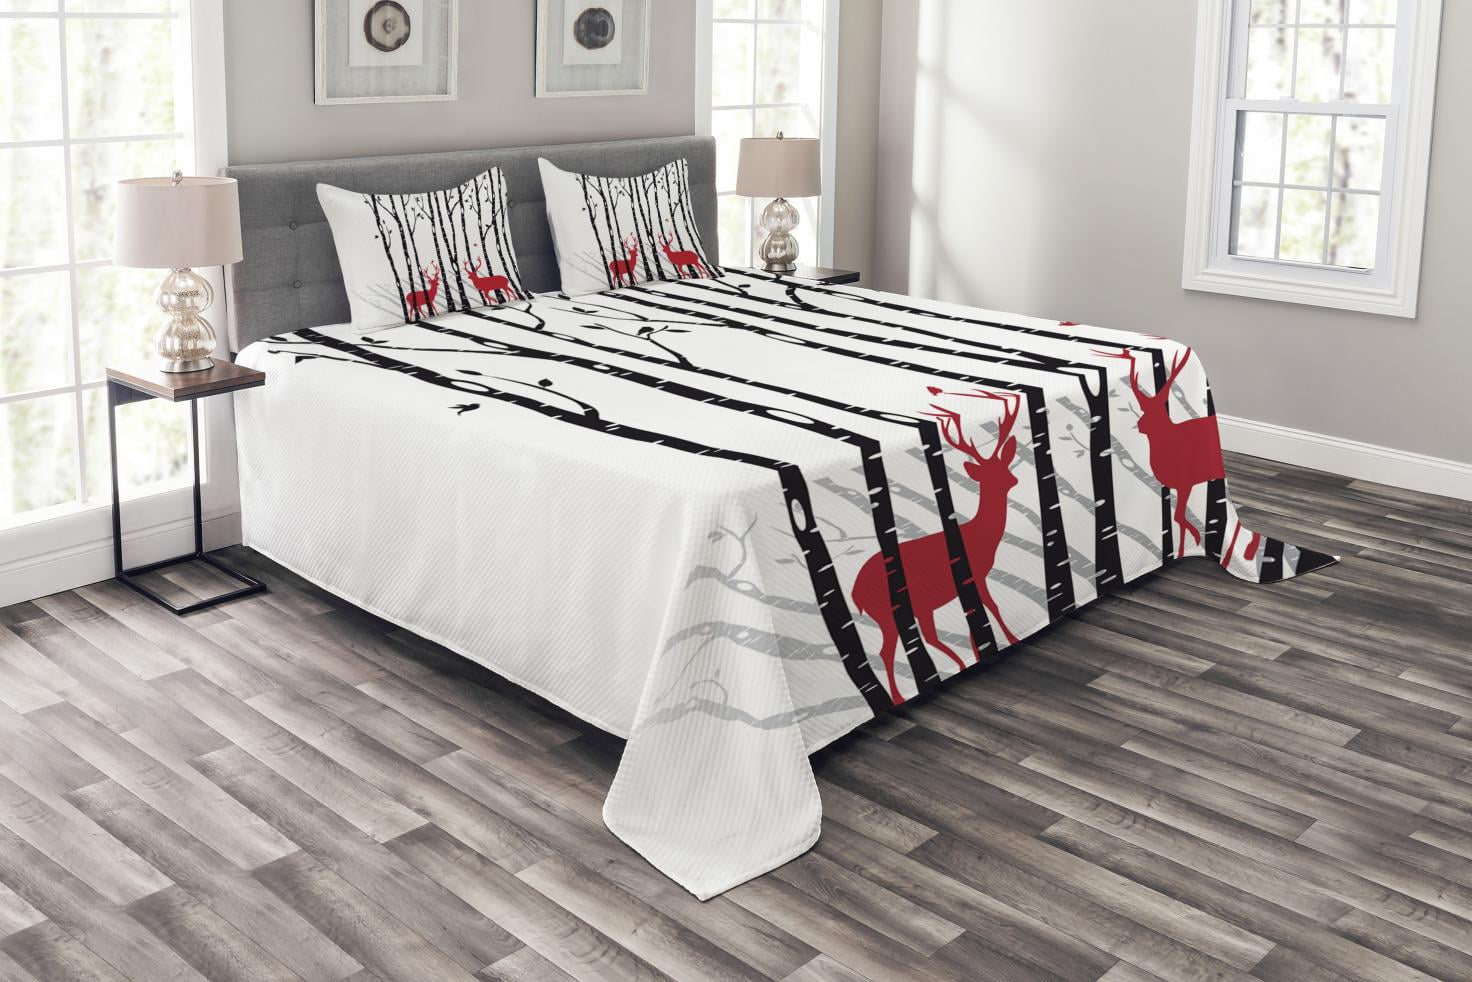 Red Black Grey White Decorative 2 Piece Bedding Set with 1 Pillow Sham Deer Tree Forest with Red Holiday Theme Flying Leaves Branch Reindeer Ambesonne Antlers Duvet Cover Set Twin Size 